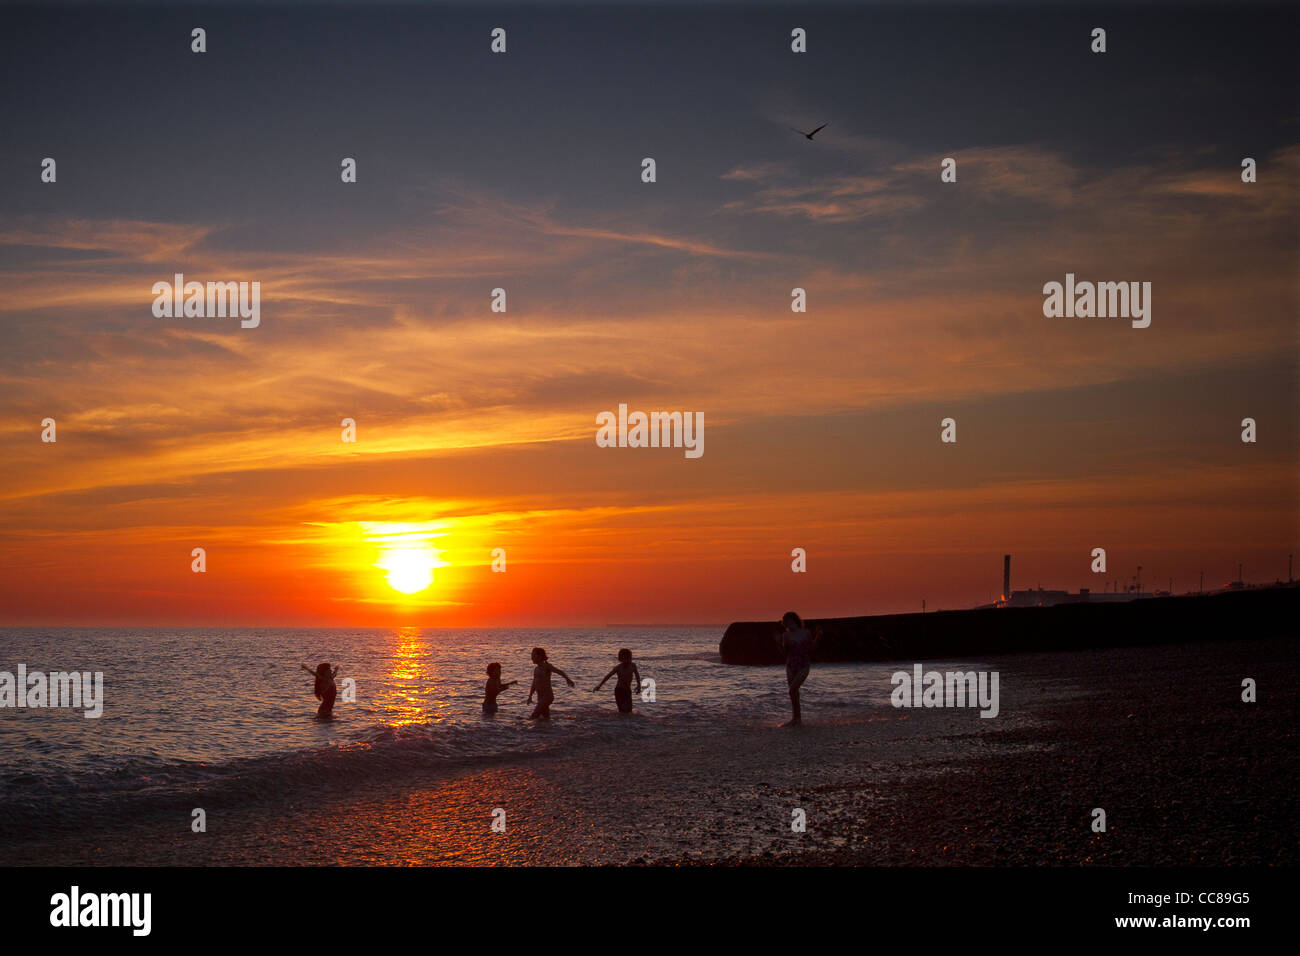 A sunset in Hove/Brighton, England Stock Photo